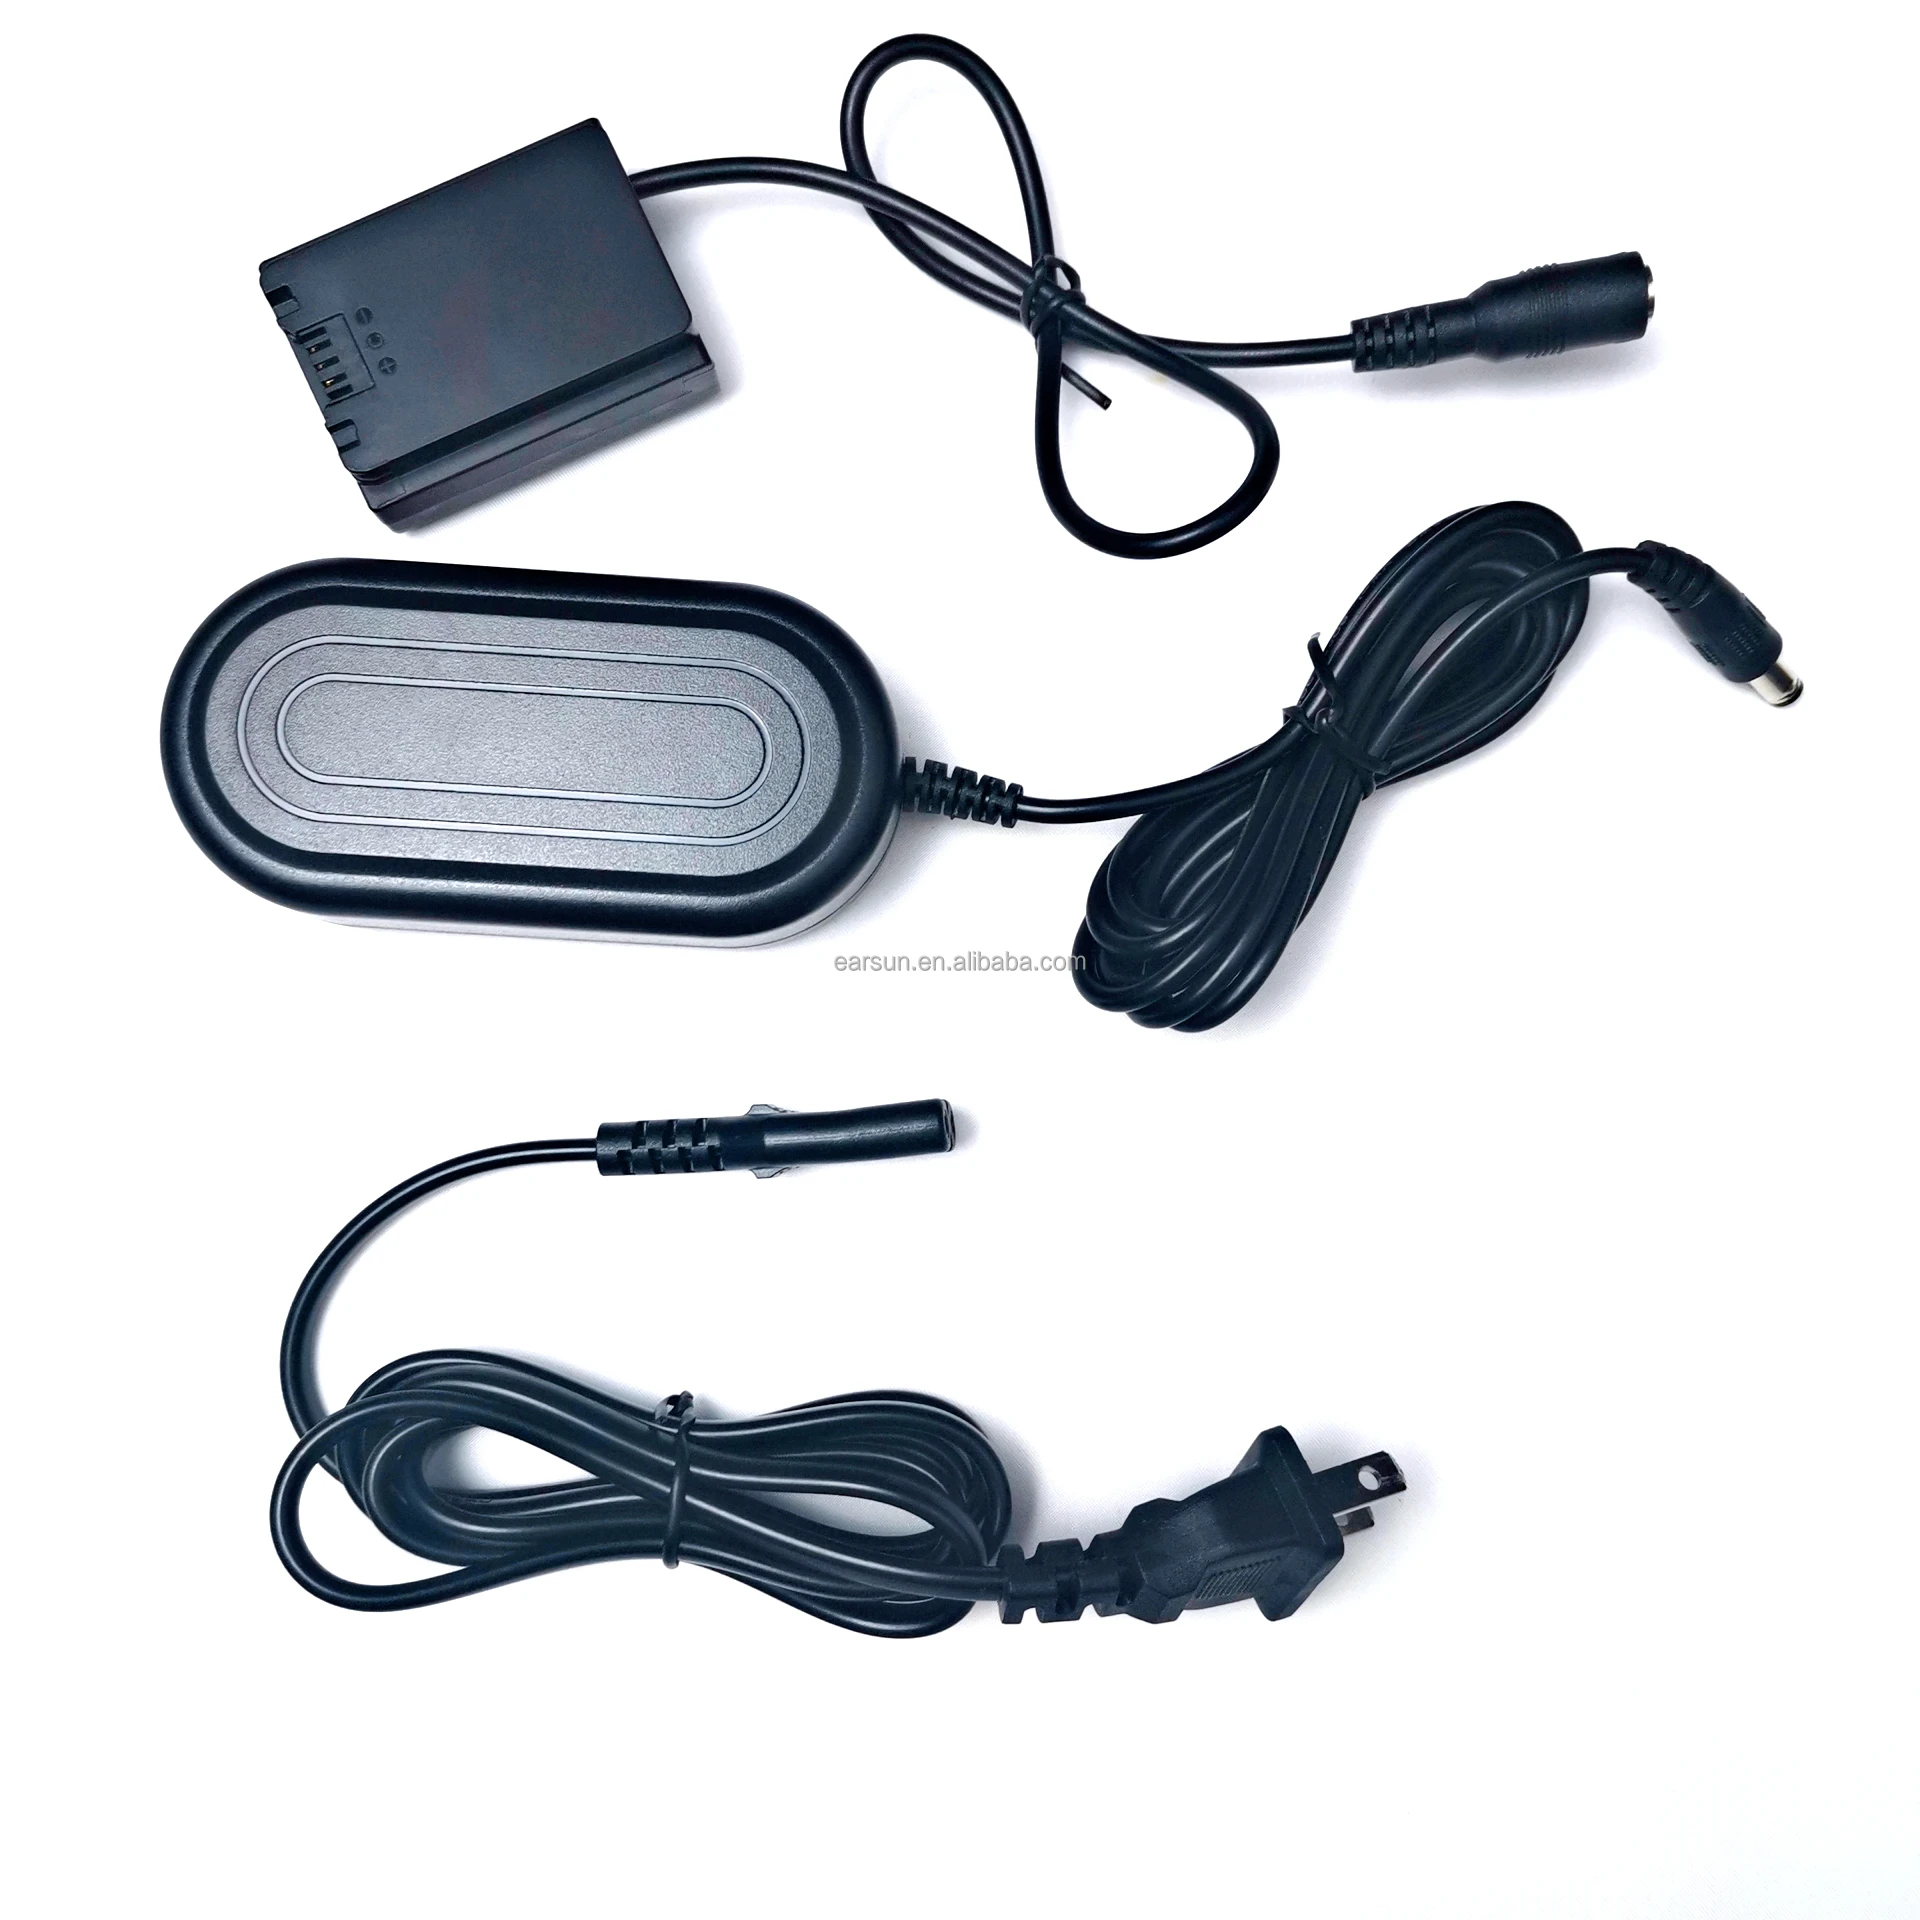 

AC Power Adapter AC-PW20 PW20 for Sony Cameras Alpha A7 7R 7S NEX-3 5 6 7 SLT-A33 A55 A65 II A7000 A6500 A6300 A6000, Black